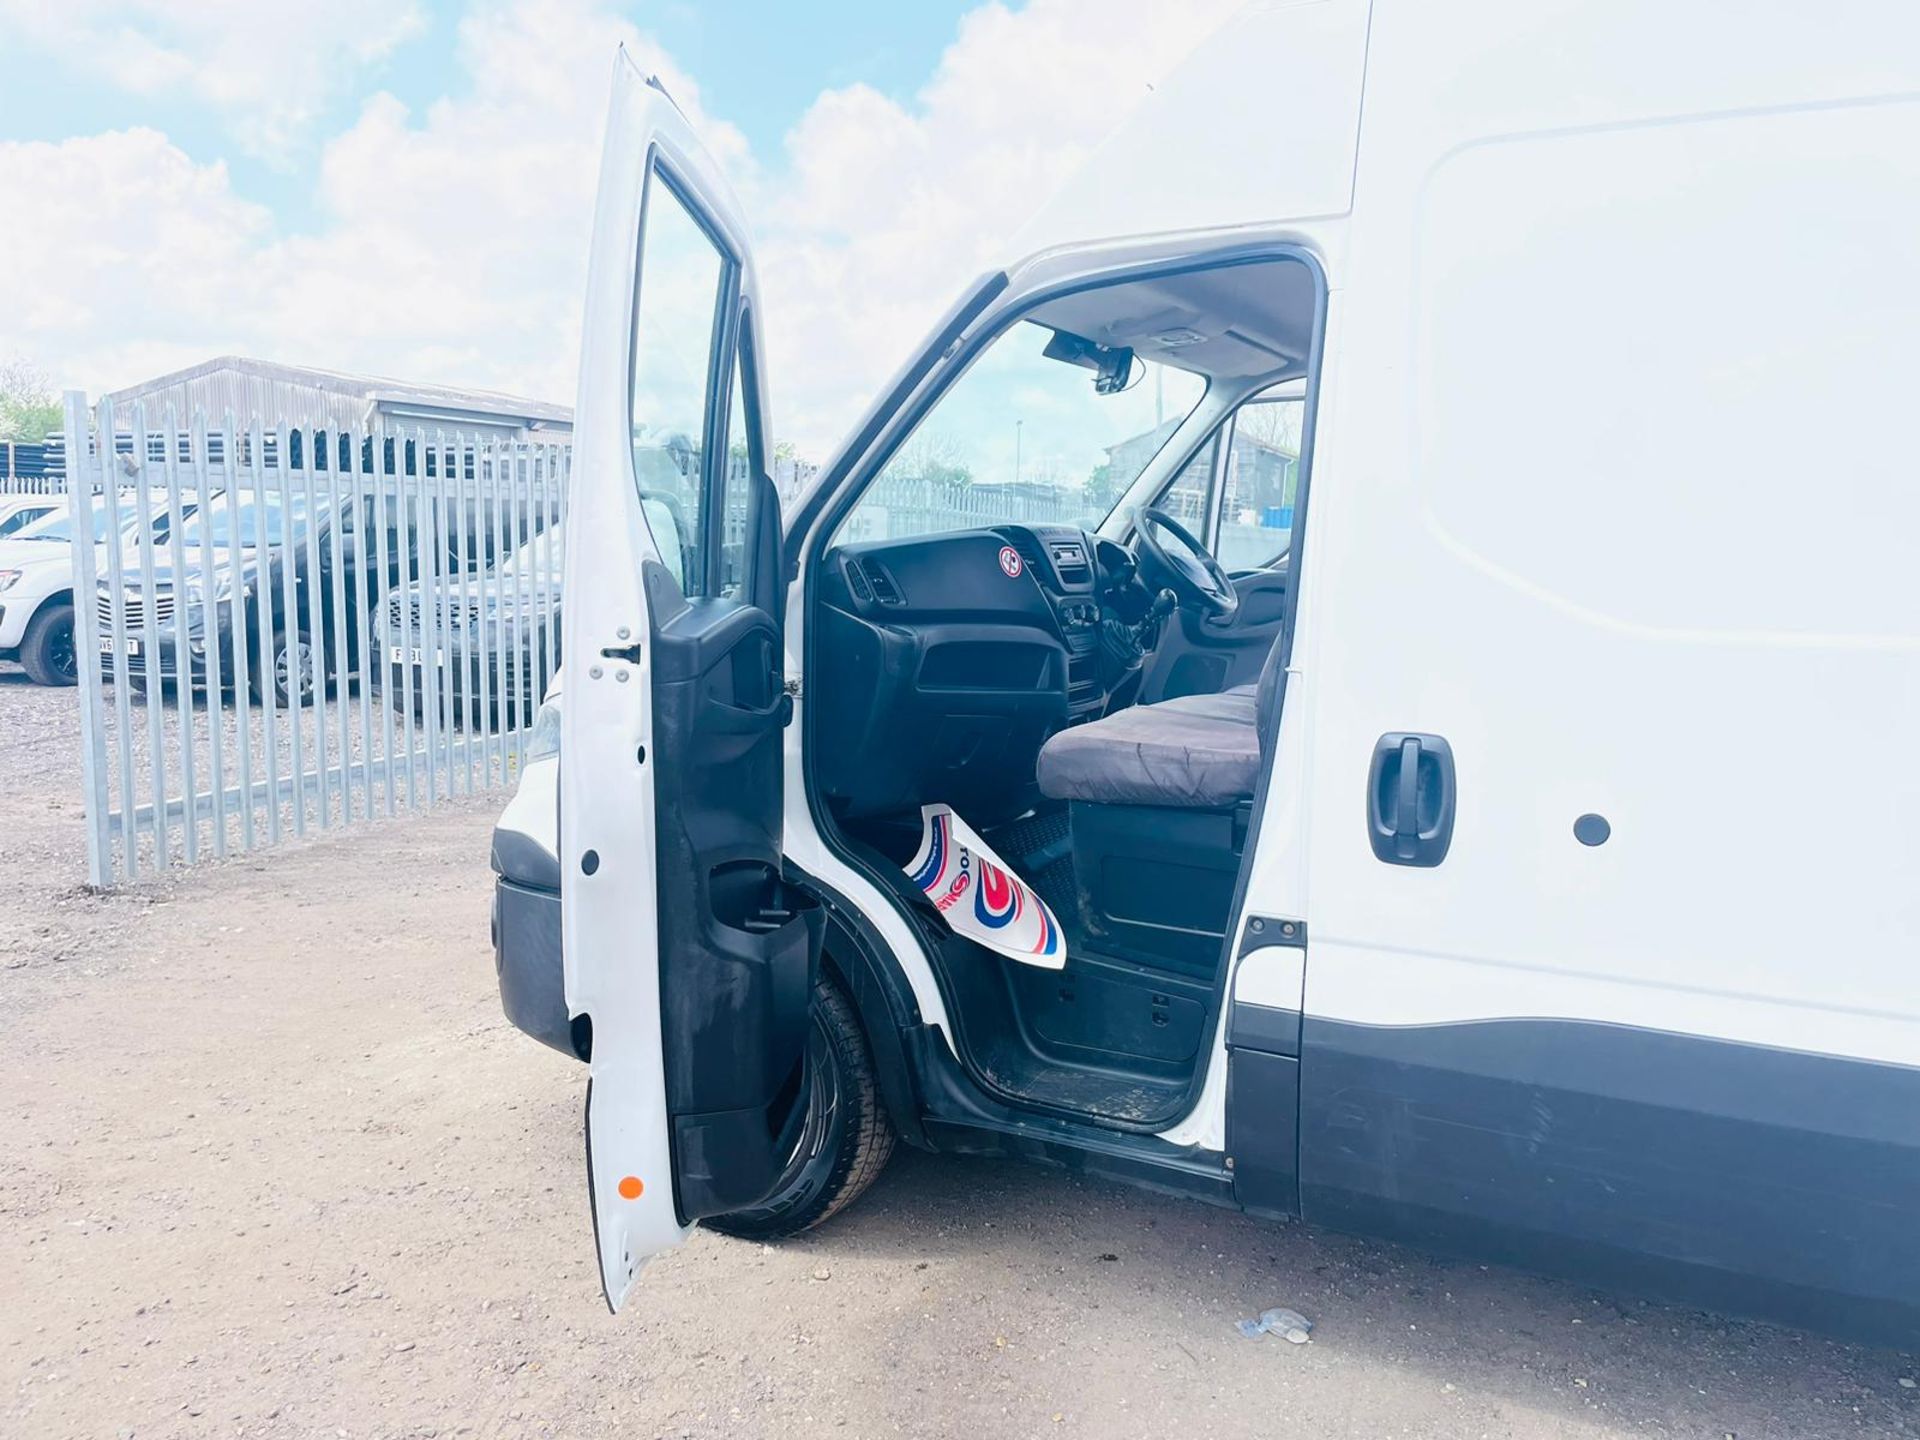 ** ON SALE **Iveco Daily 35S13 2.3 L2 H1 2016 '66 Reg' -ULEZ Compliant -Bluetooth Handsfree -Tow Bar - Image 19 of 24